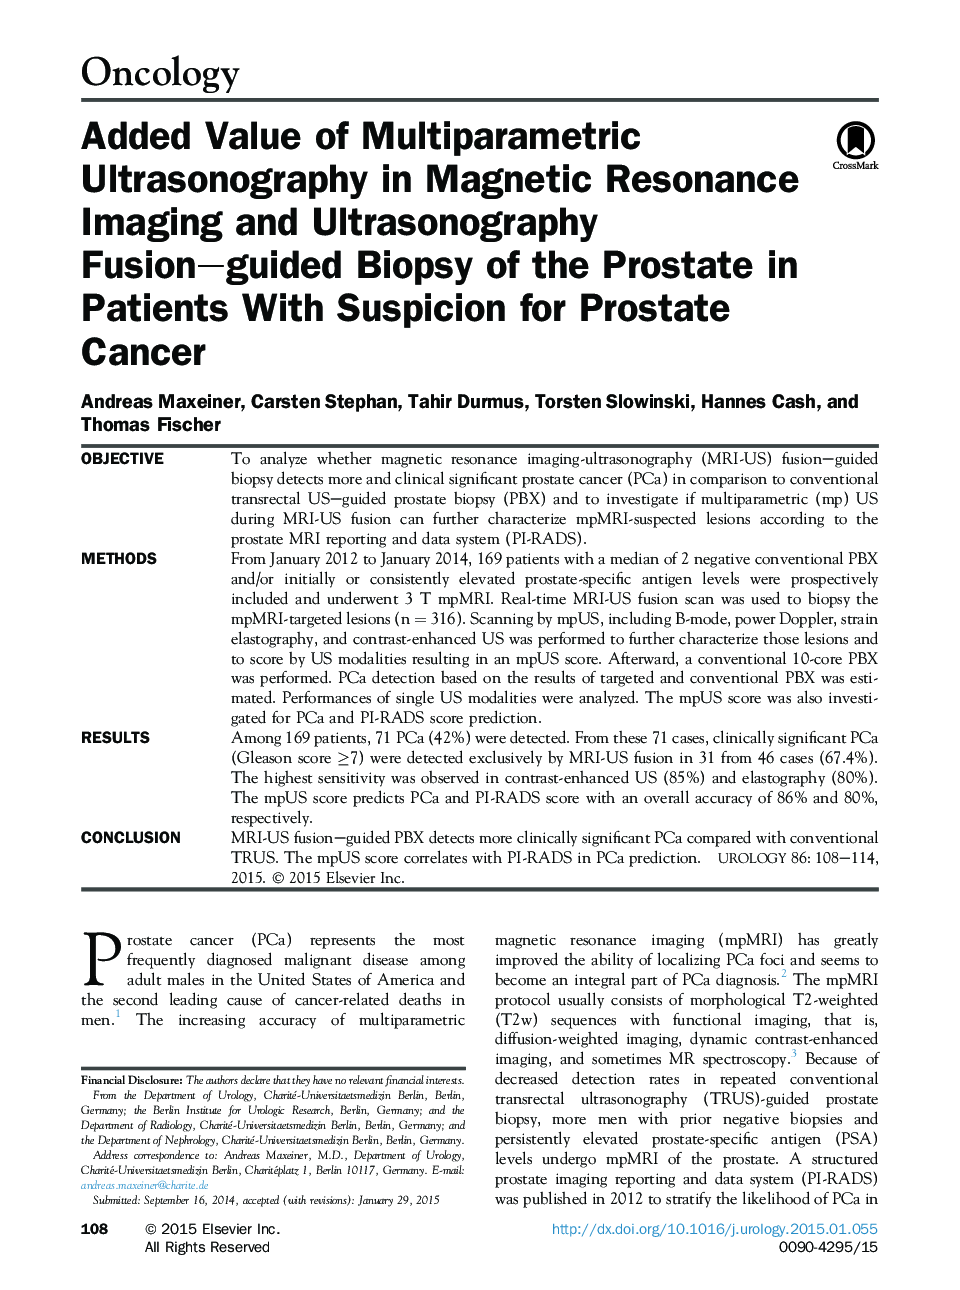 Added Value of Multiparametric Ultrasonography in Magnetic Resonance Imaging and Ultrasonography Fusion–guided Biopsy of the Prostate in Patients With Suspicion for Prostate Cancer 